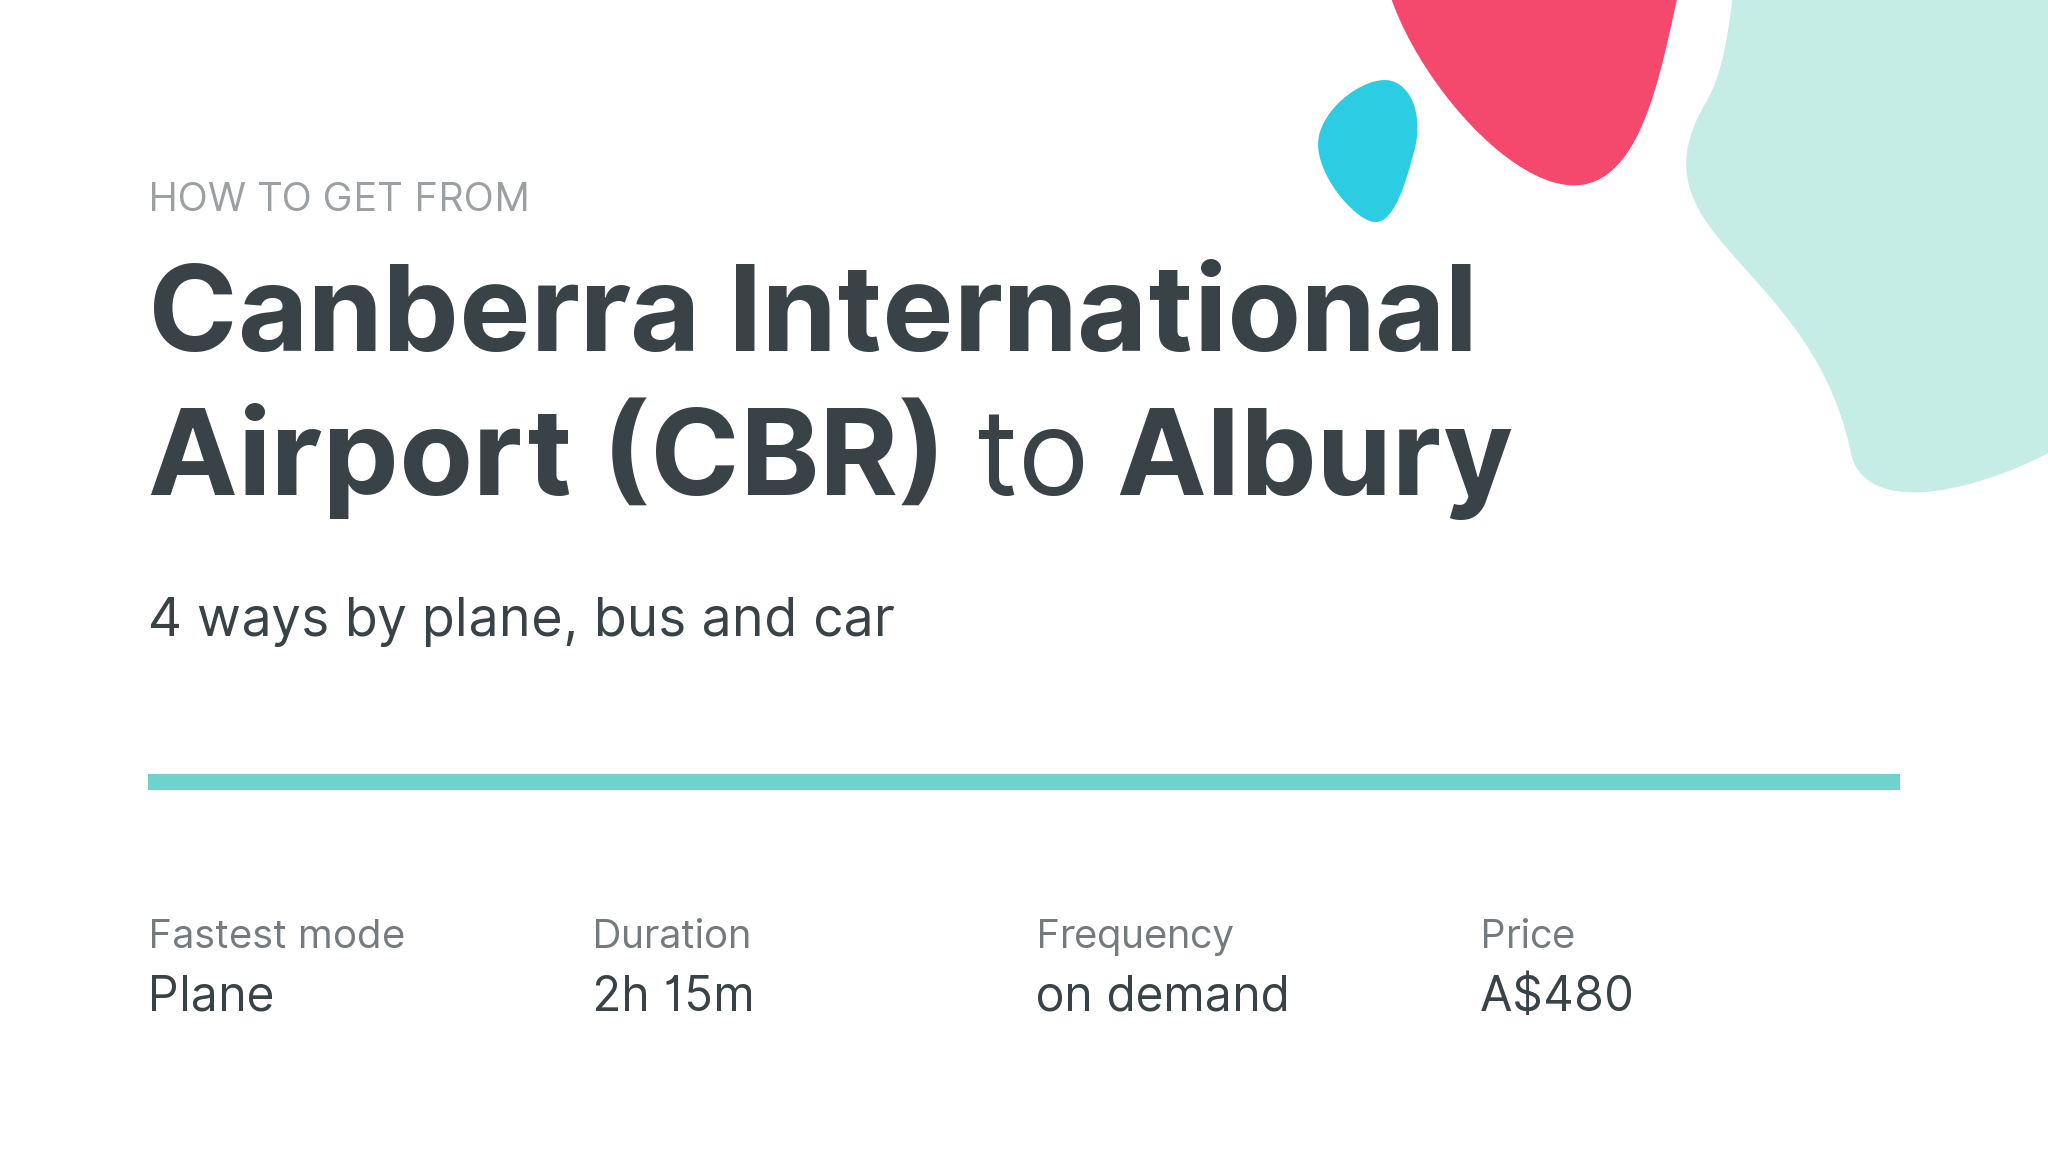 How do I get from Canberra International Airport (CBR) to Albury